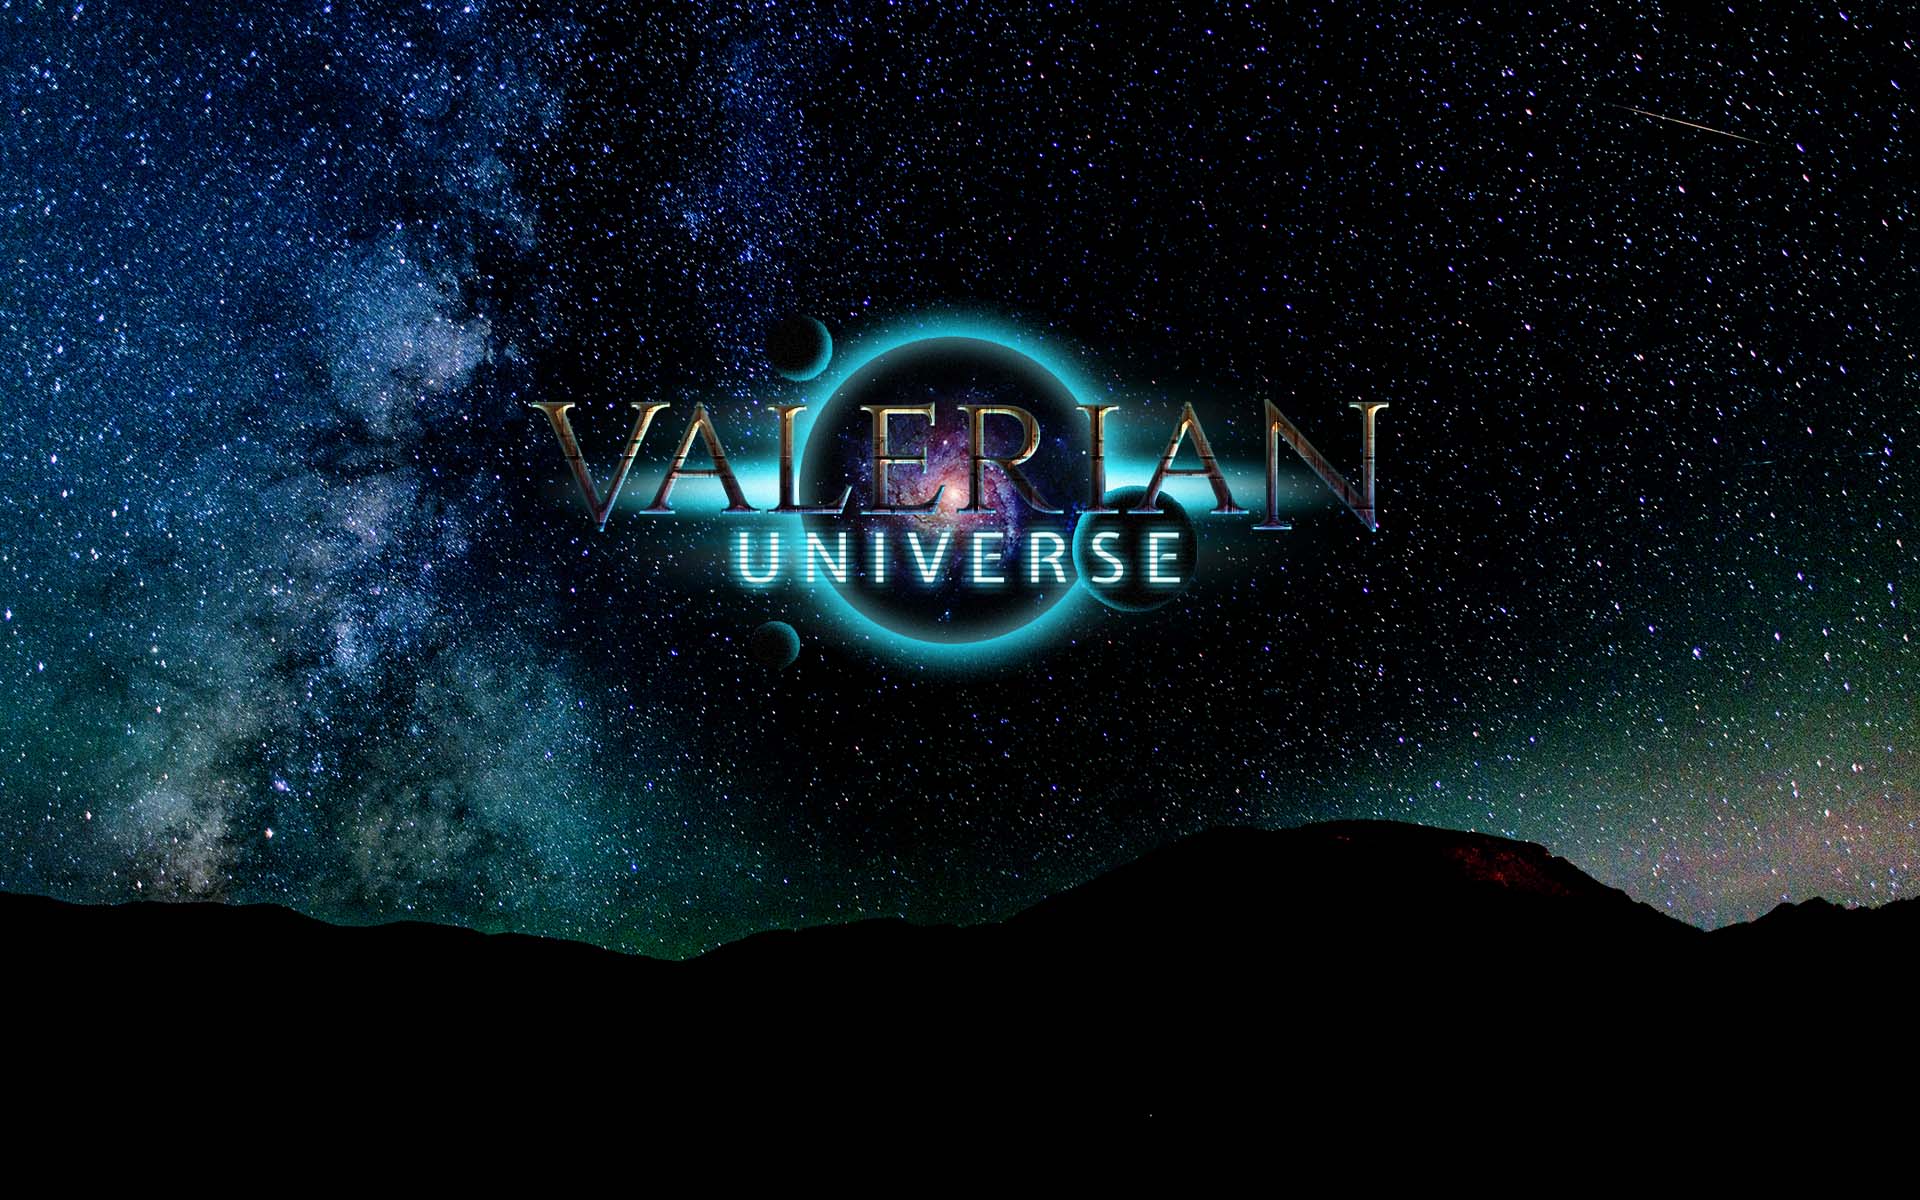 Valerian Universe Players Receive Free Bitcoin and HYPER for Participation